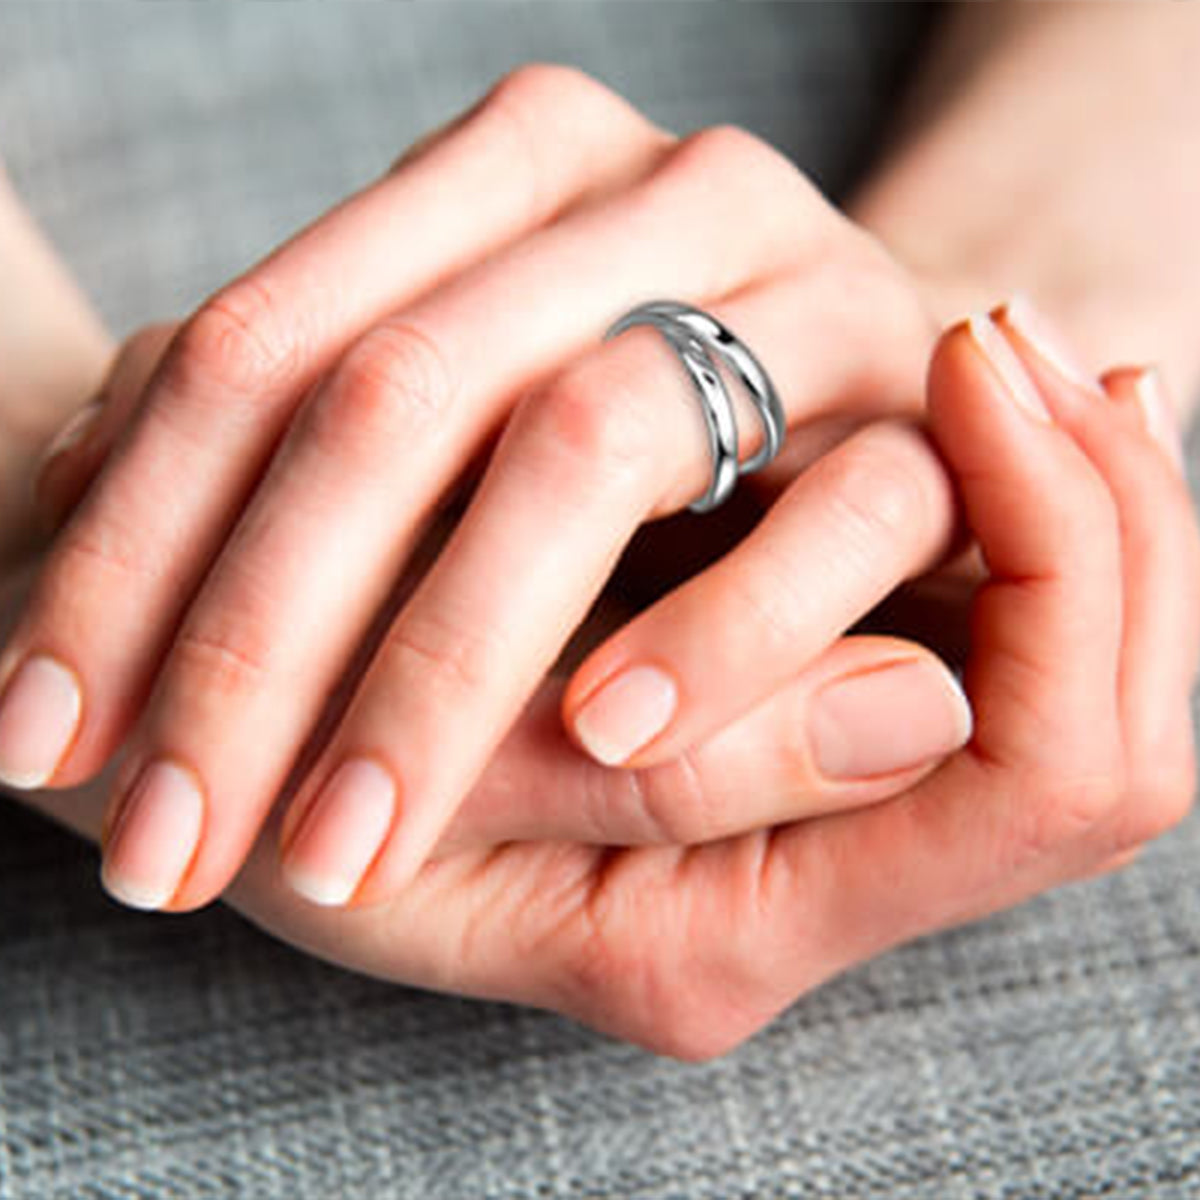 Woman's hands with the Infinity Ring on her finger